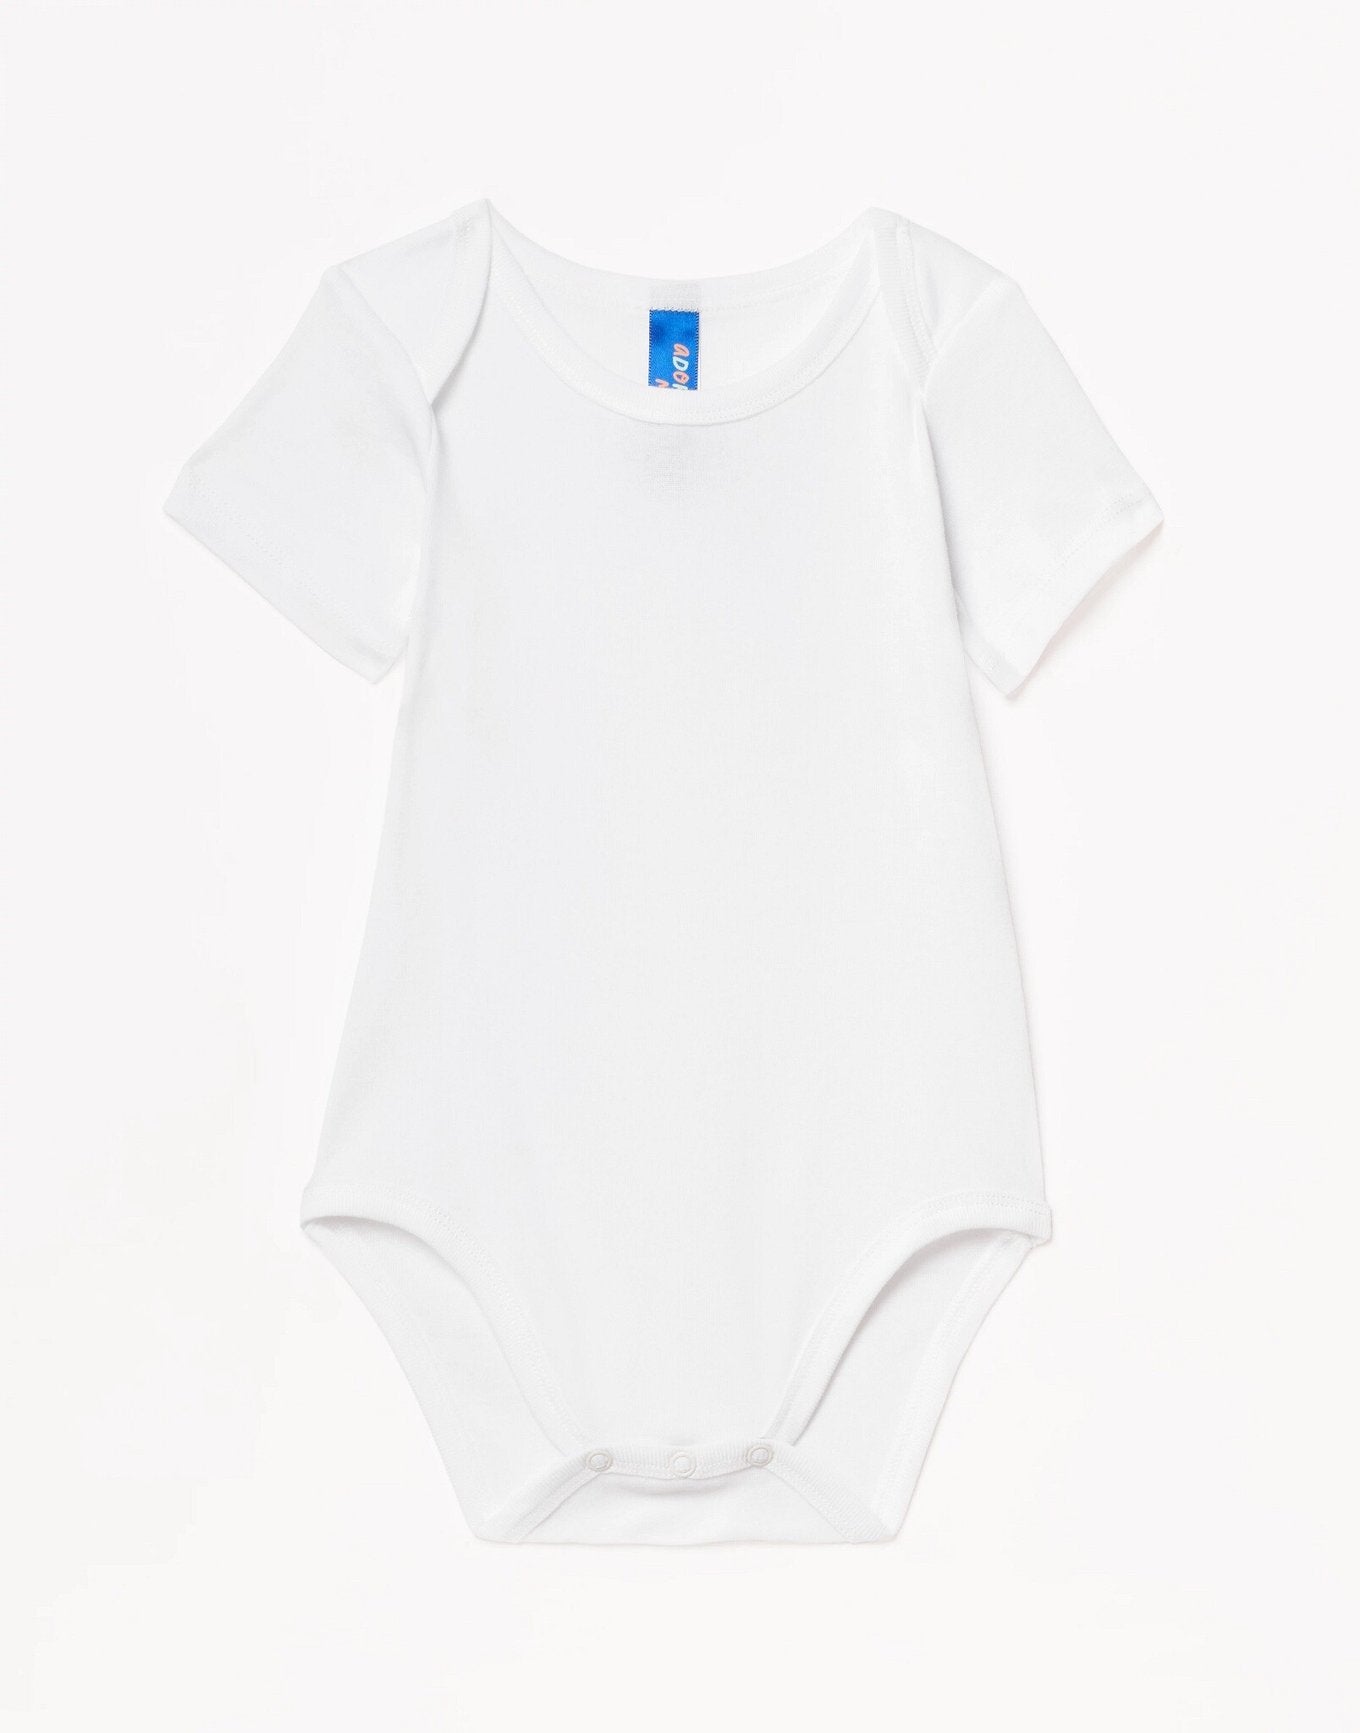 Outlines Kids Finley in color Bright White and shape onesie